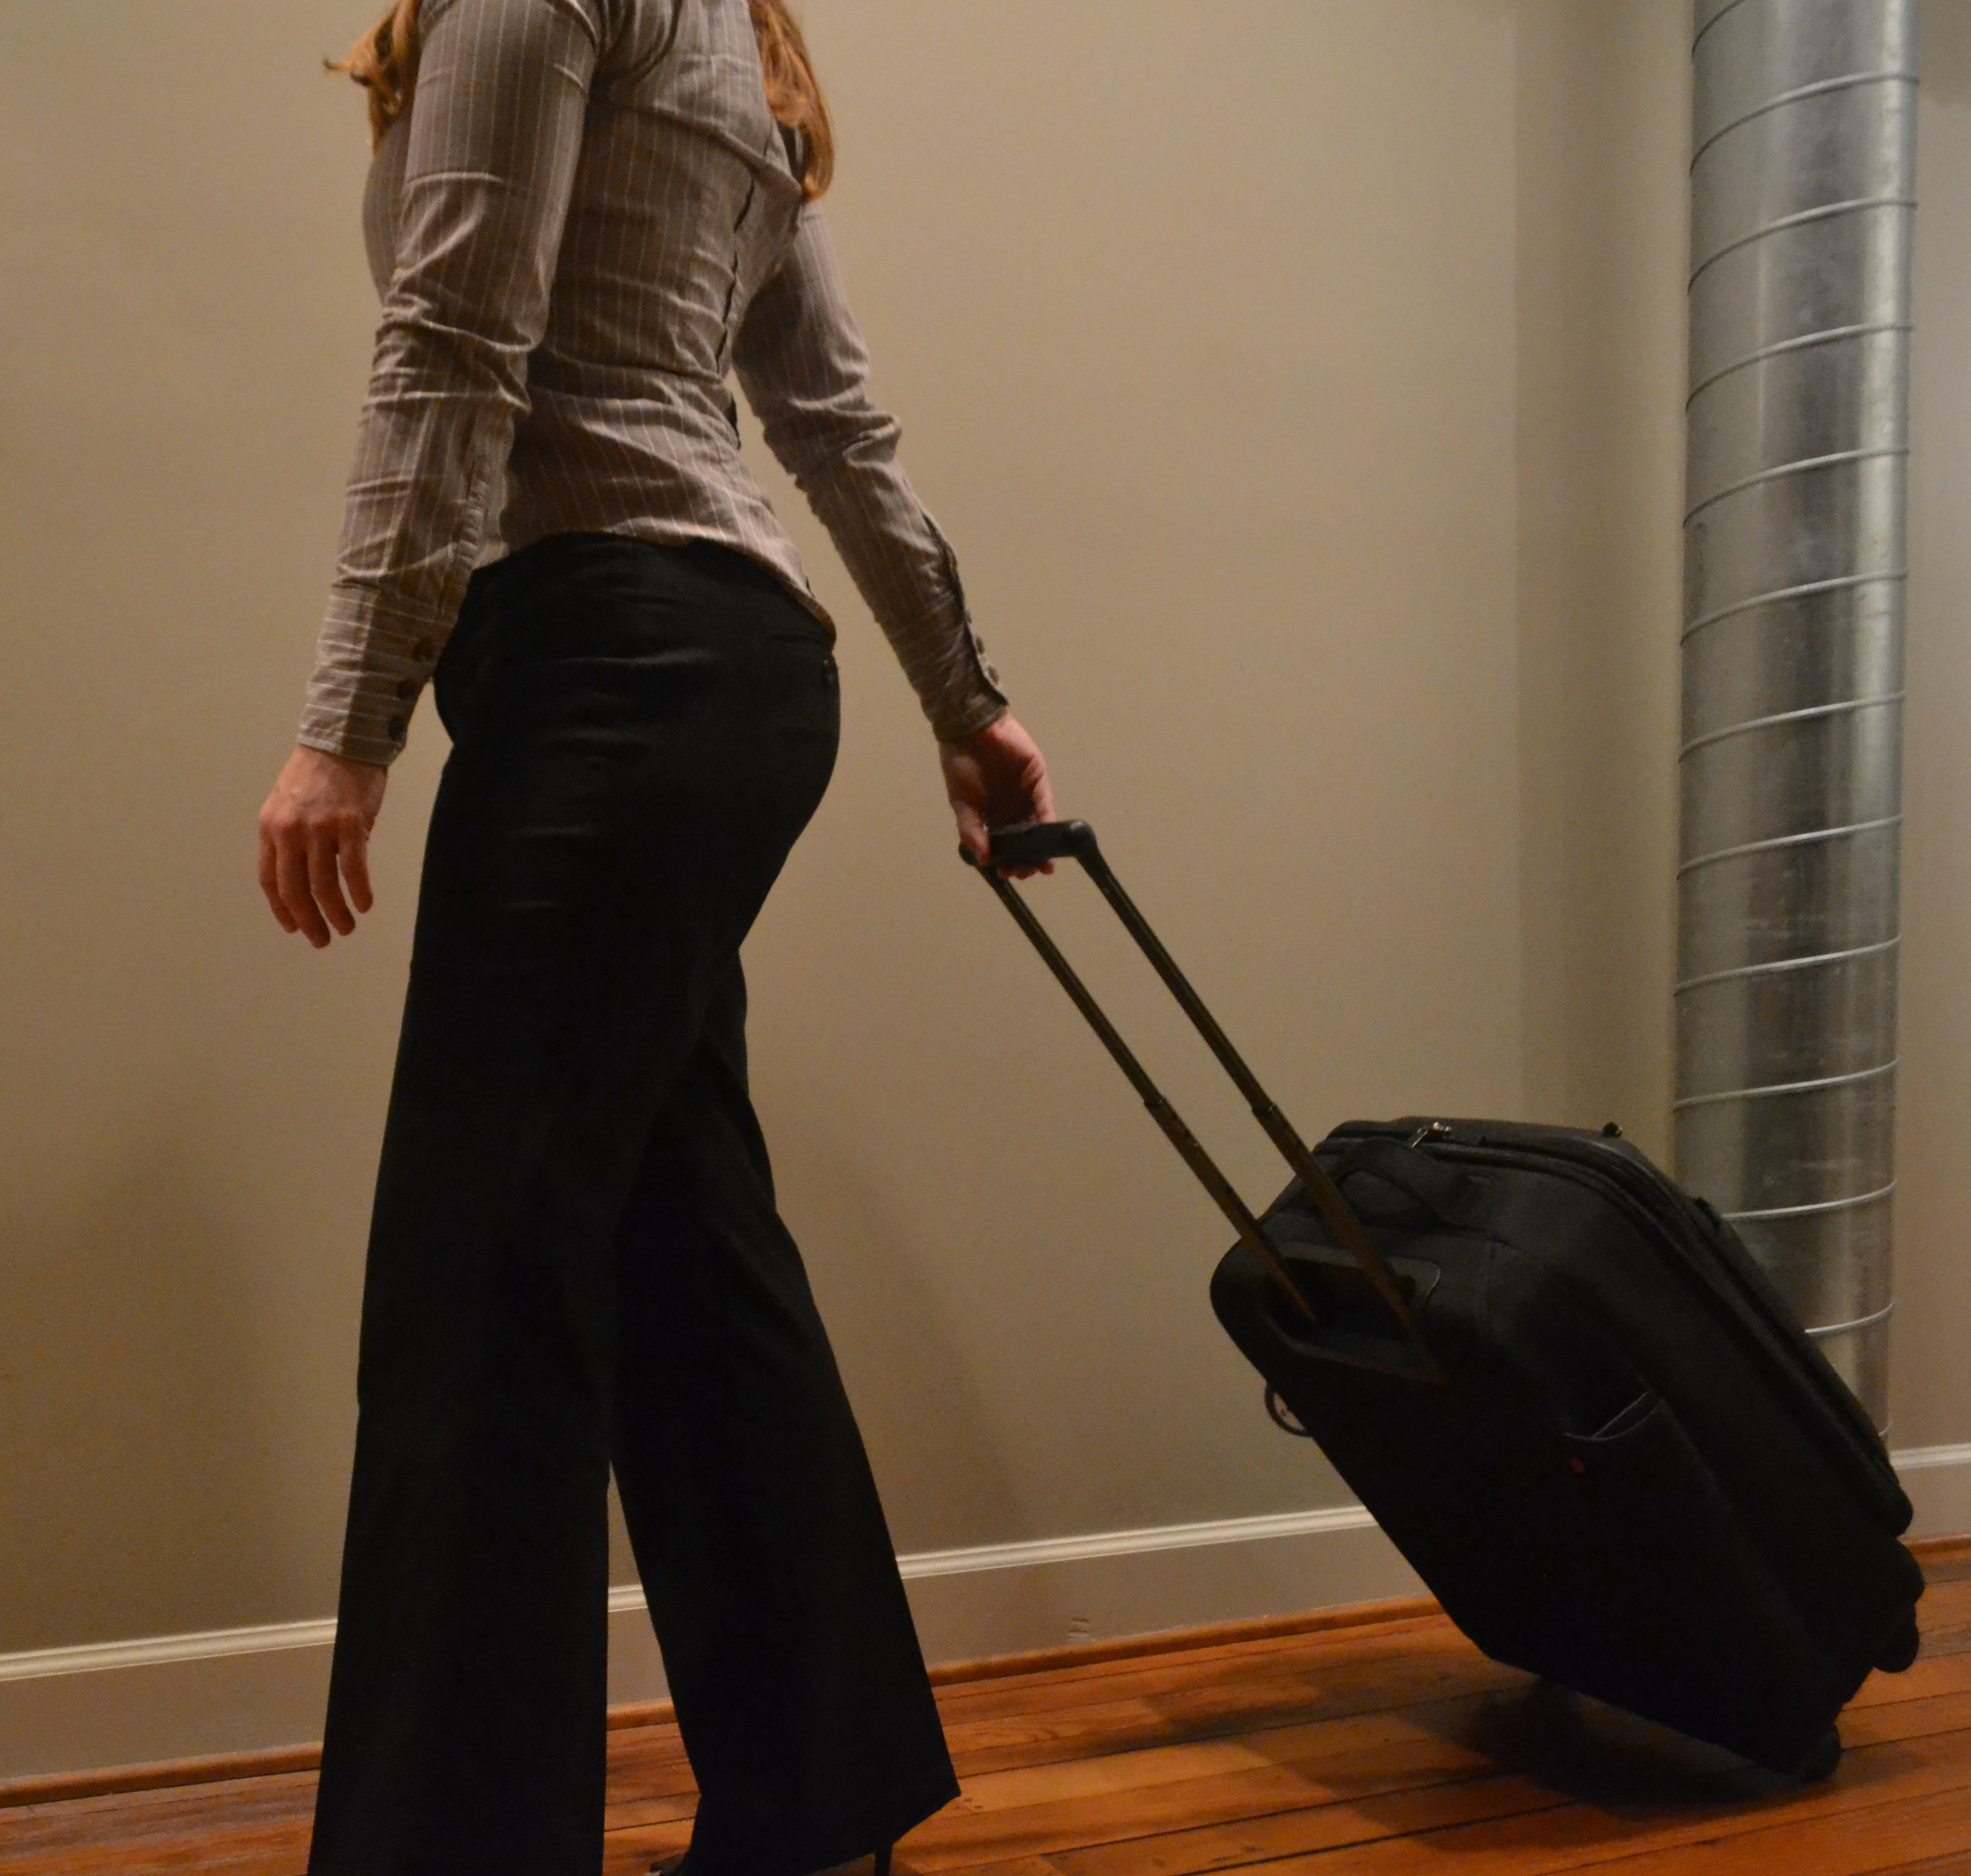 United Airlines (UA) Carry-on Baggage Allowance-Size, Weight, Personal  Items Allowed in Cabin 